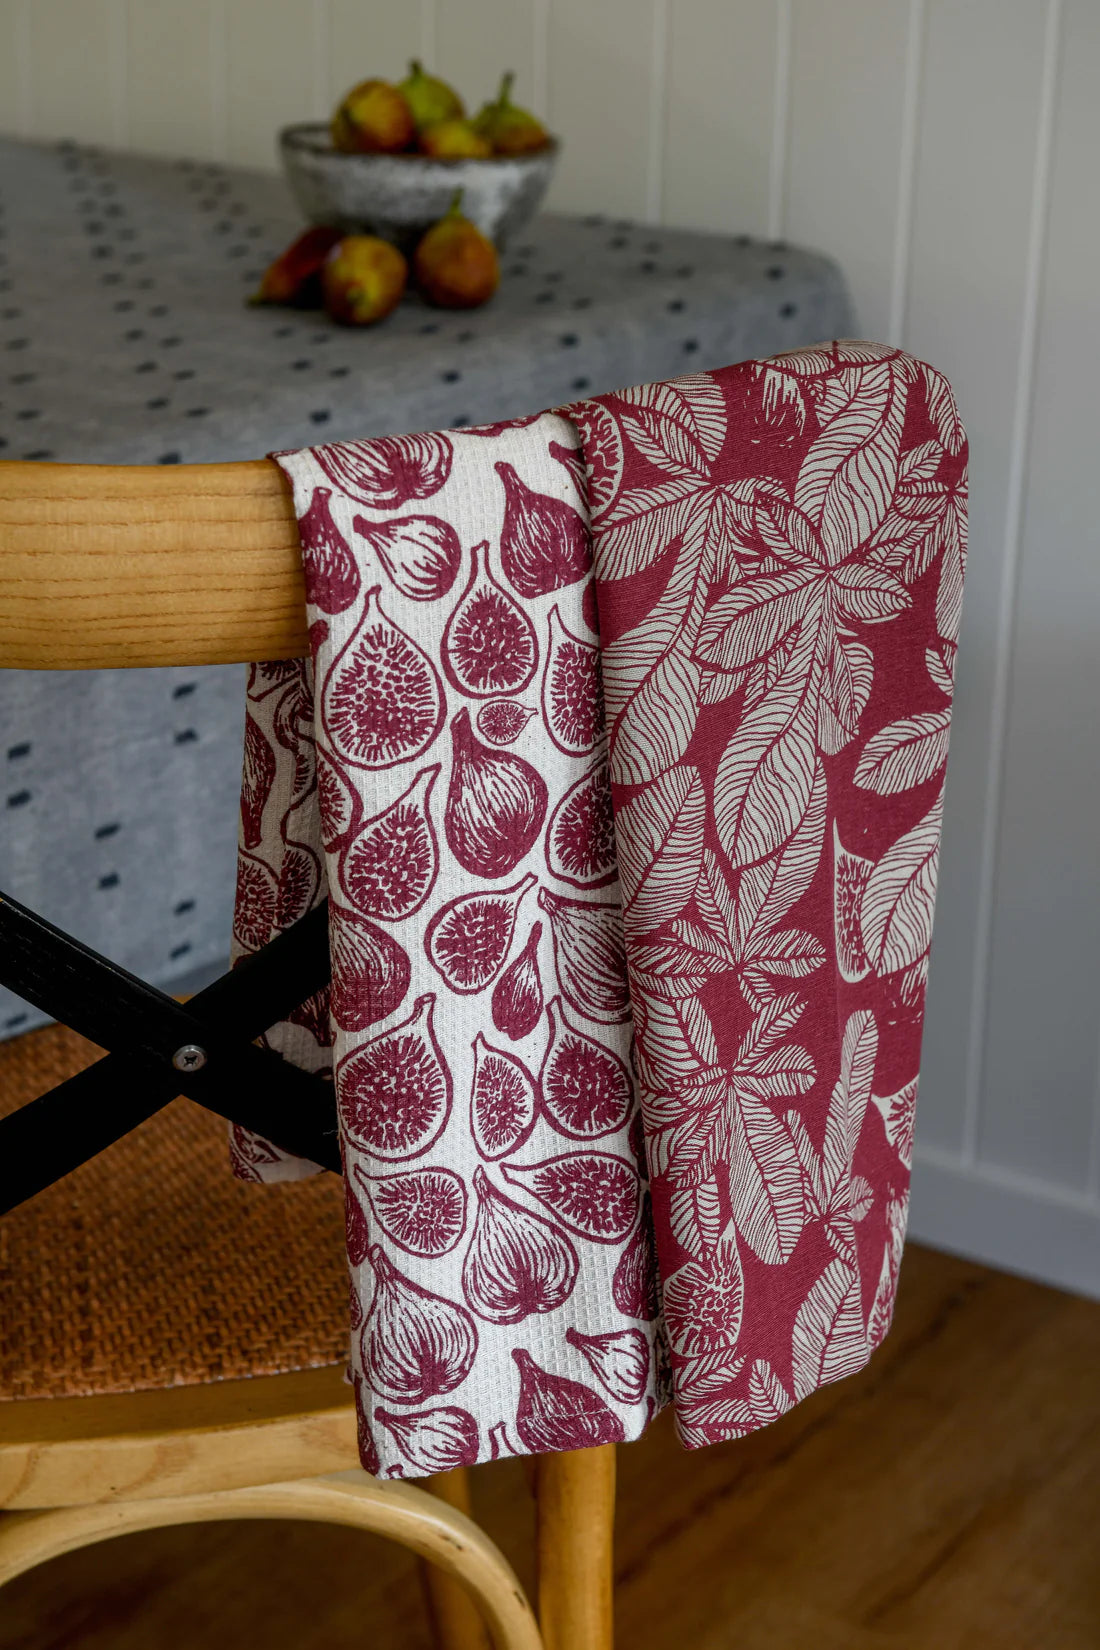 A set of 2 beautiful tea towels, each screen printed with a hand drawn fig design.